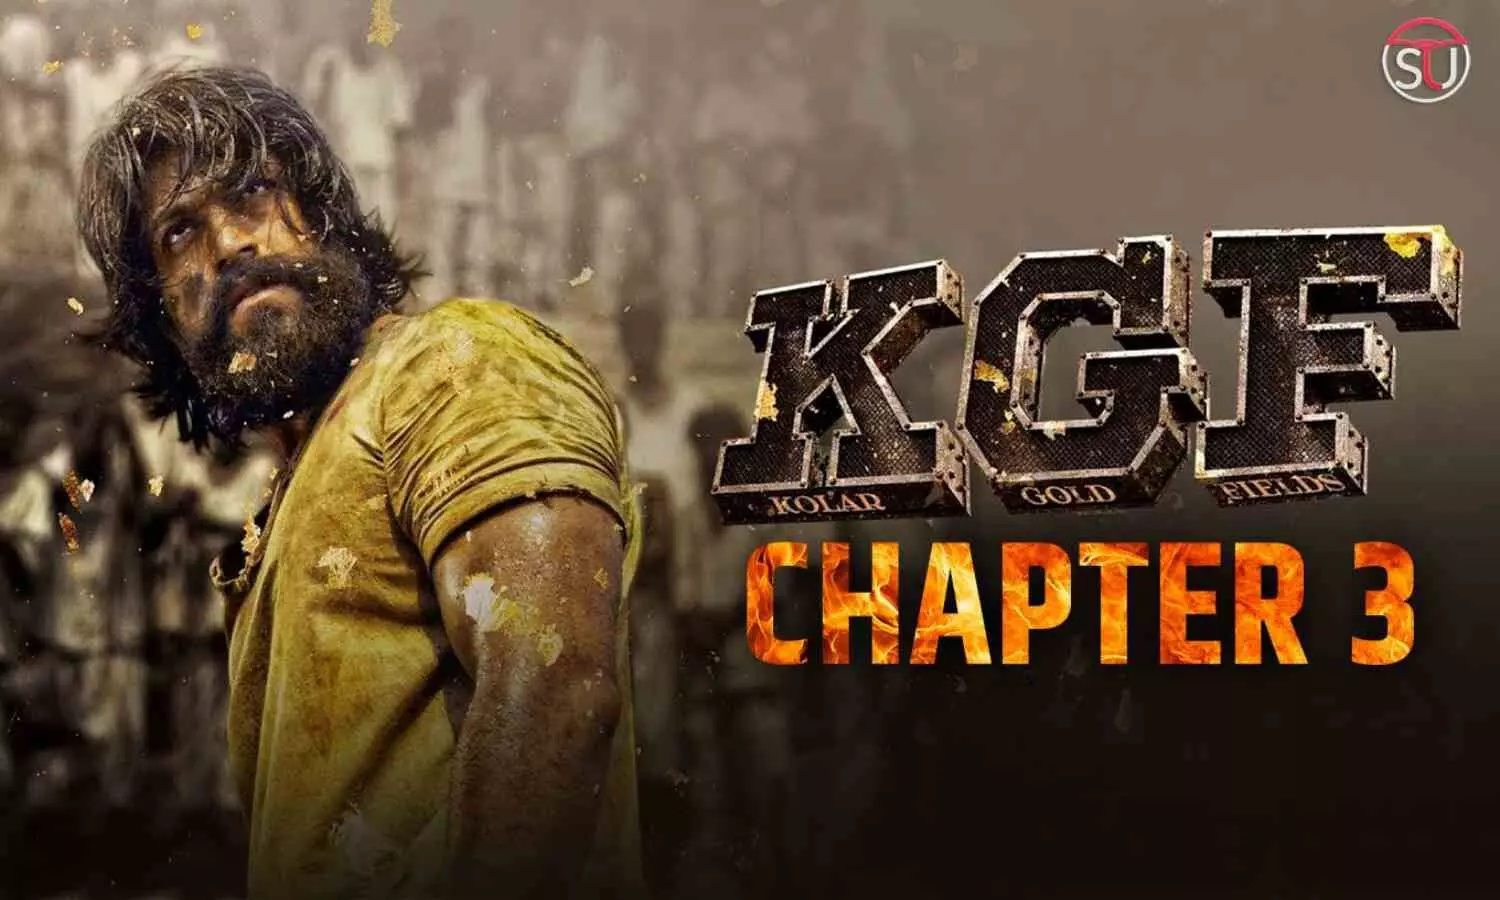 KGF Chapter 3